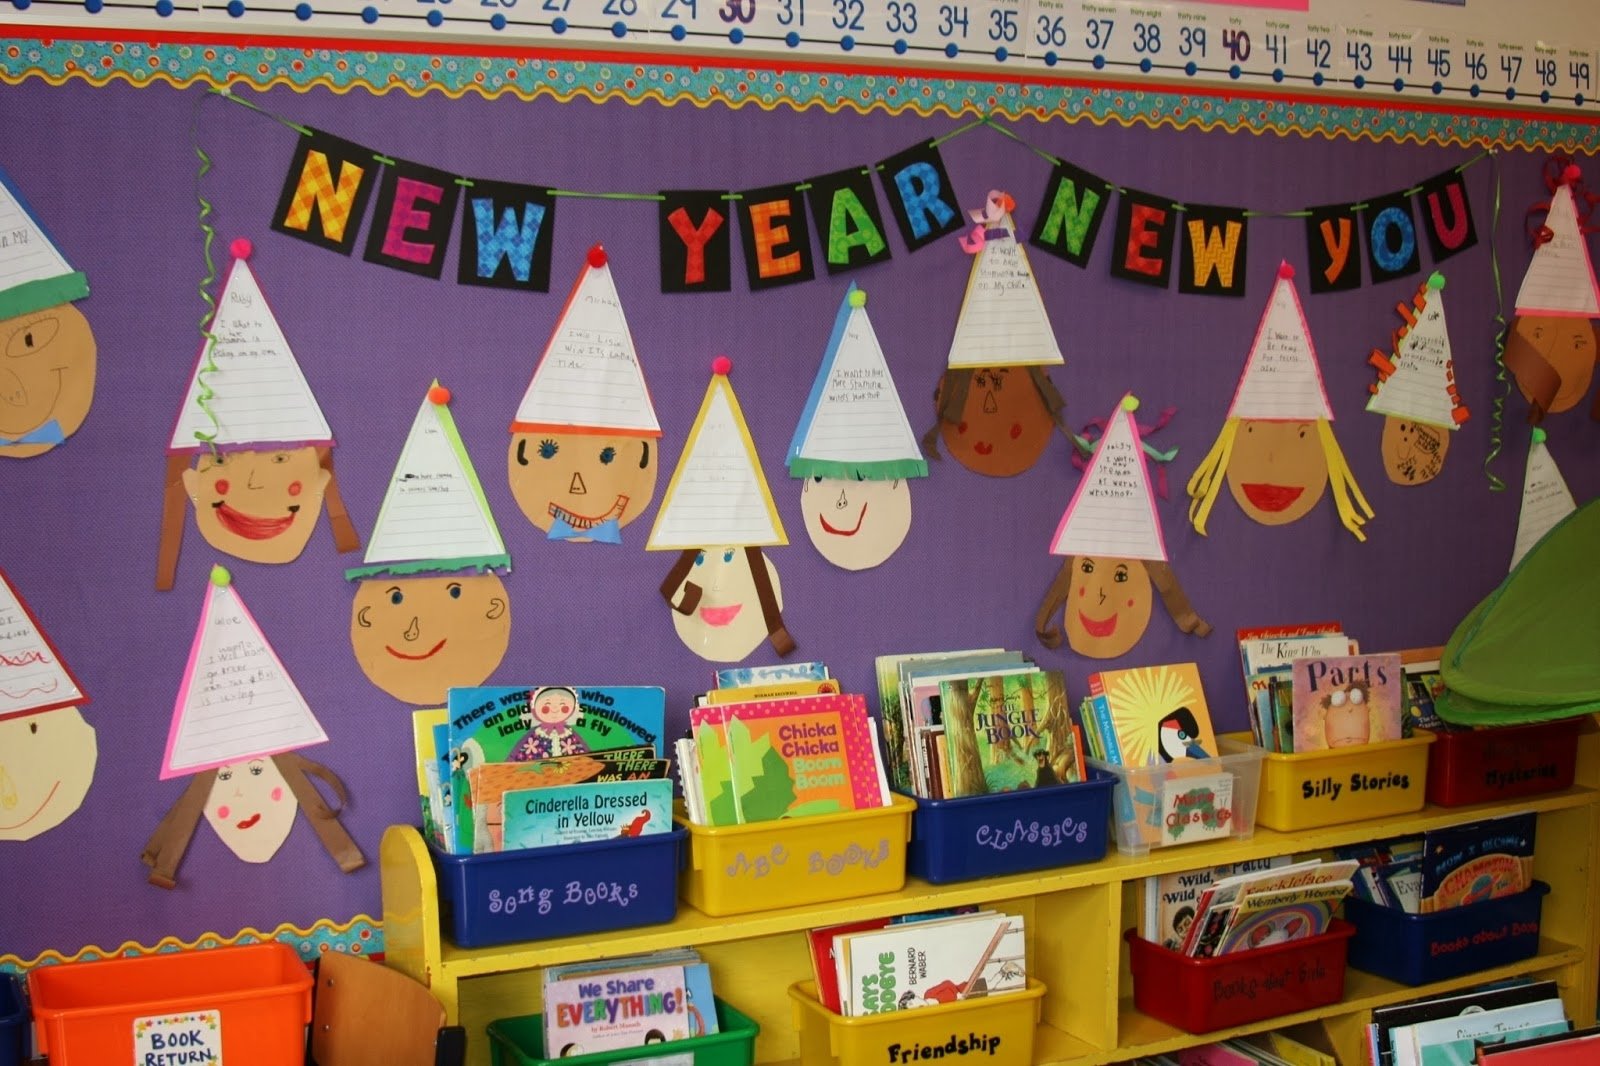 10 Lovely New Year Bulletin Board Ideas tinkering with teaching new year new you 2022